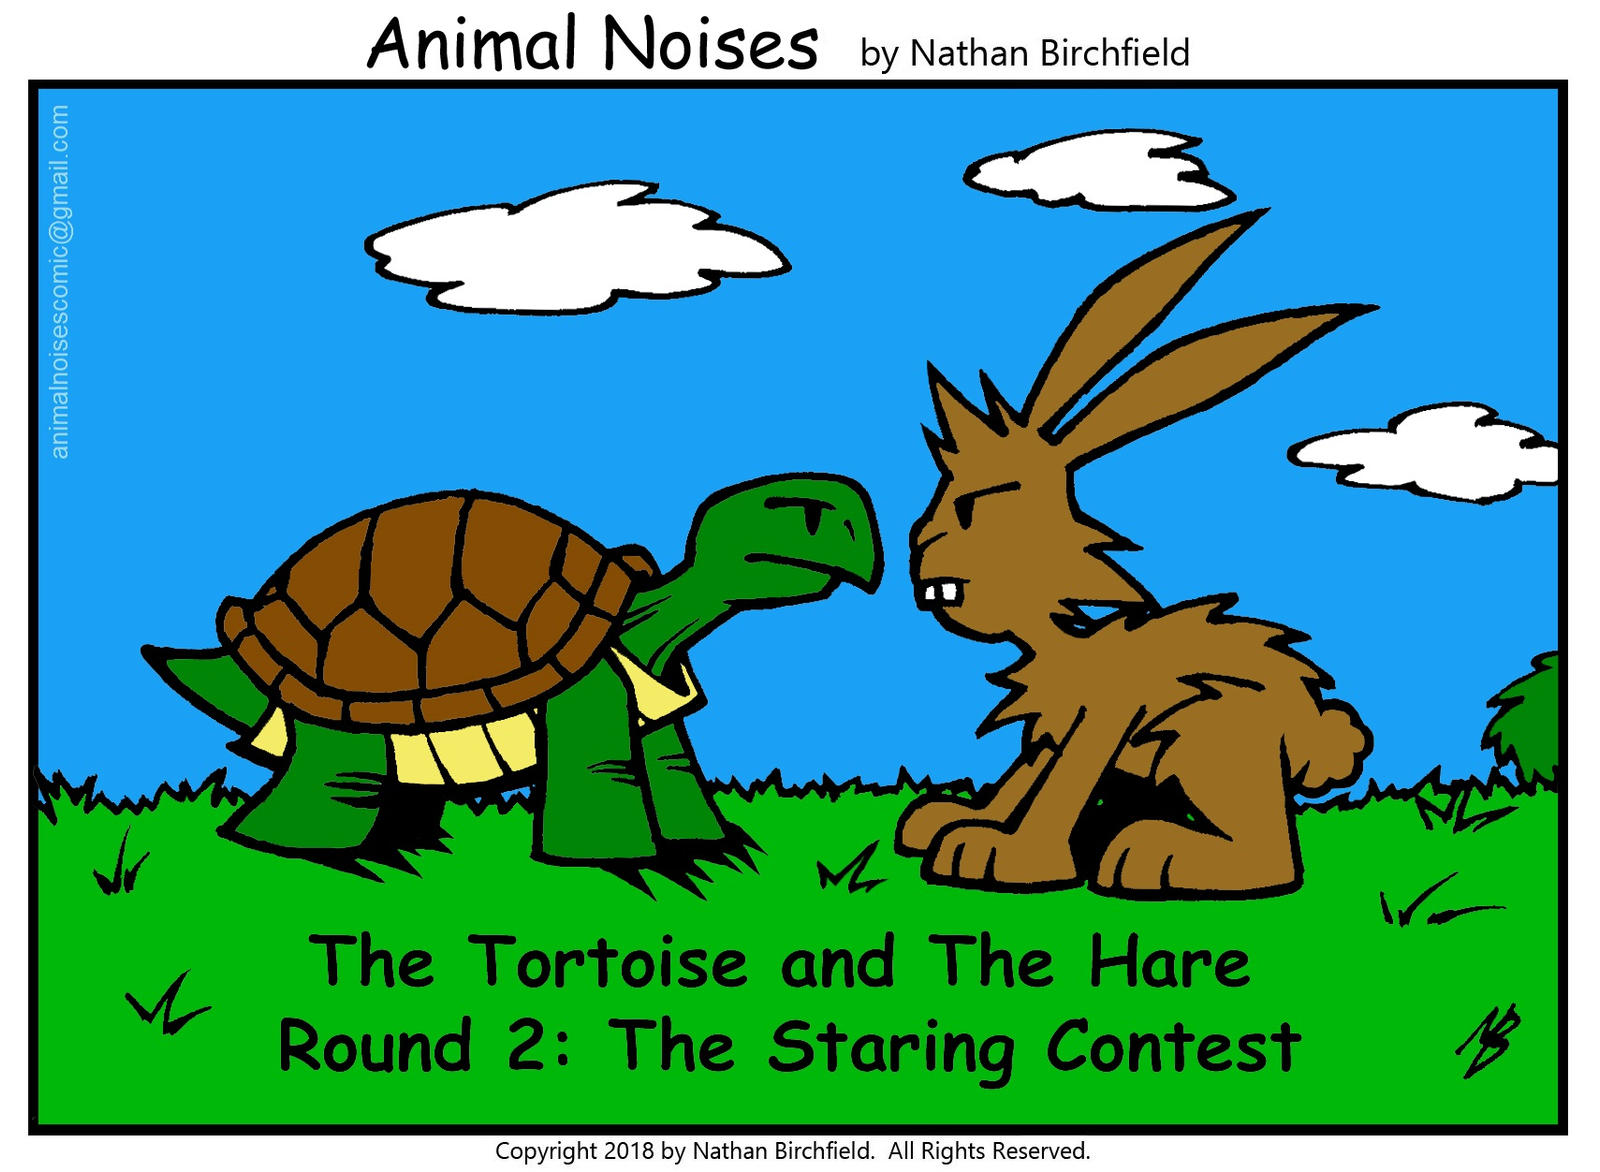 The Tortoise and The Hare: Round 2 by animalnoisescomic on DeviantArt